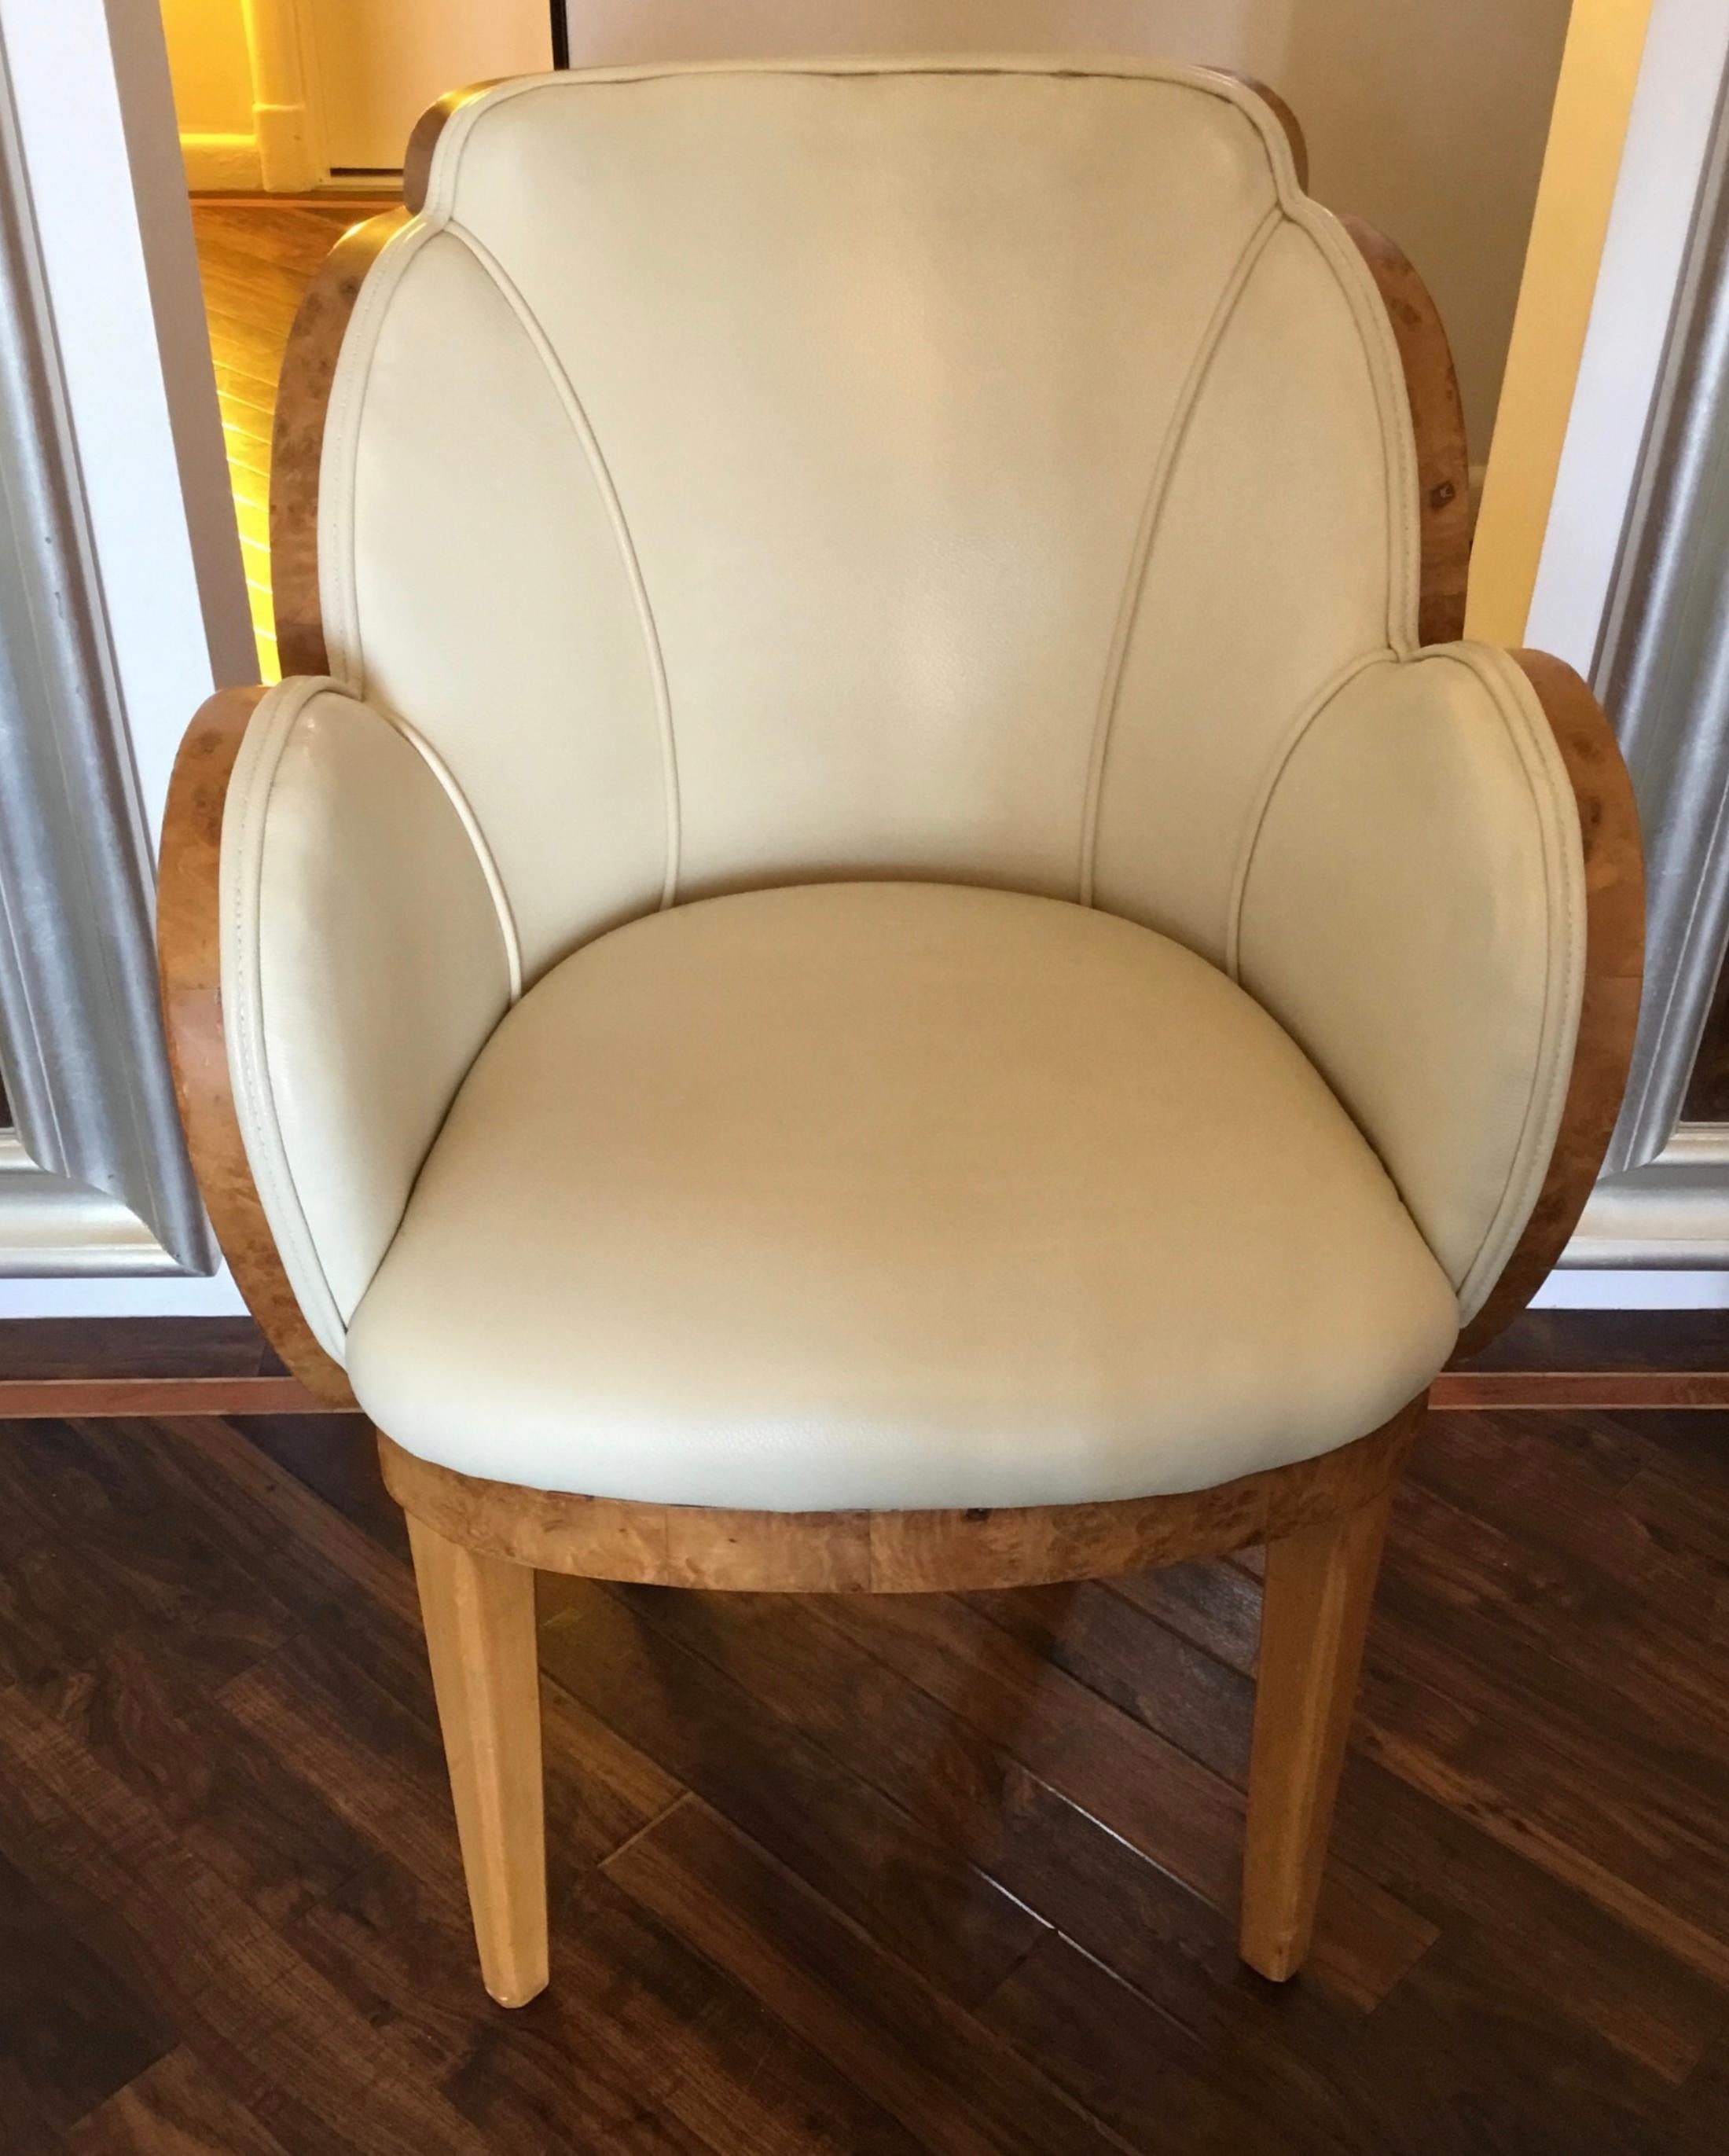 Art Deco Cloud chair by Harry and Lou Epstein. 
The sides in burr walnut and the back in a striking figured walnut. 
Upholstered in cream leather and in overall great condition.
The striking veneer detailing of this chair matches an Epstein Cloud